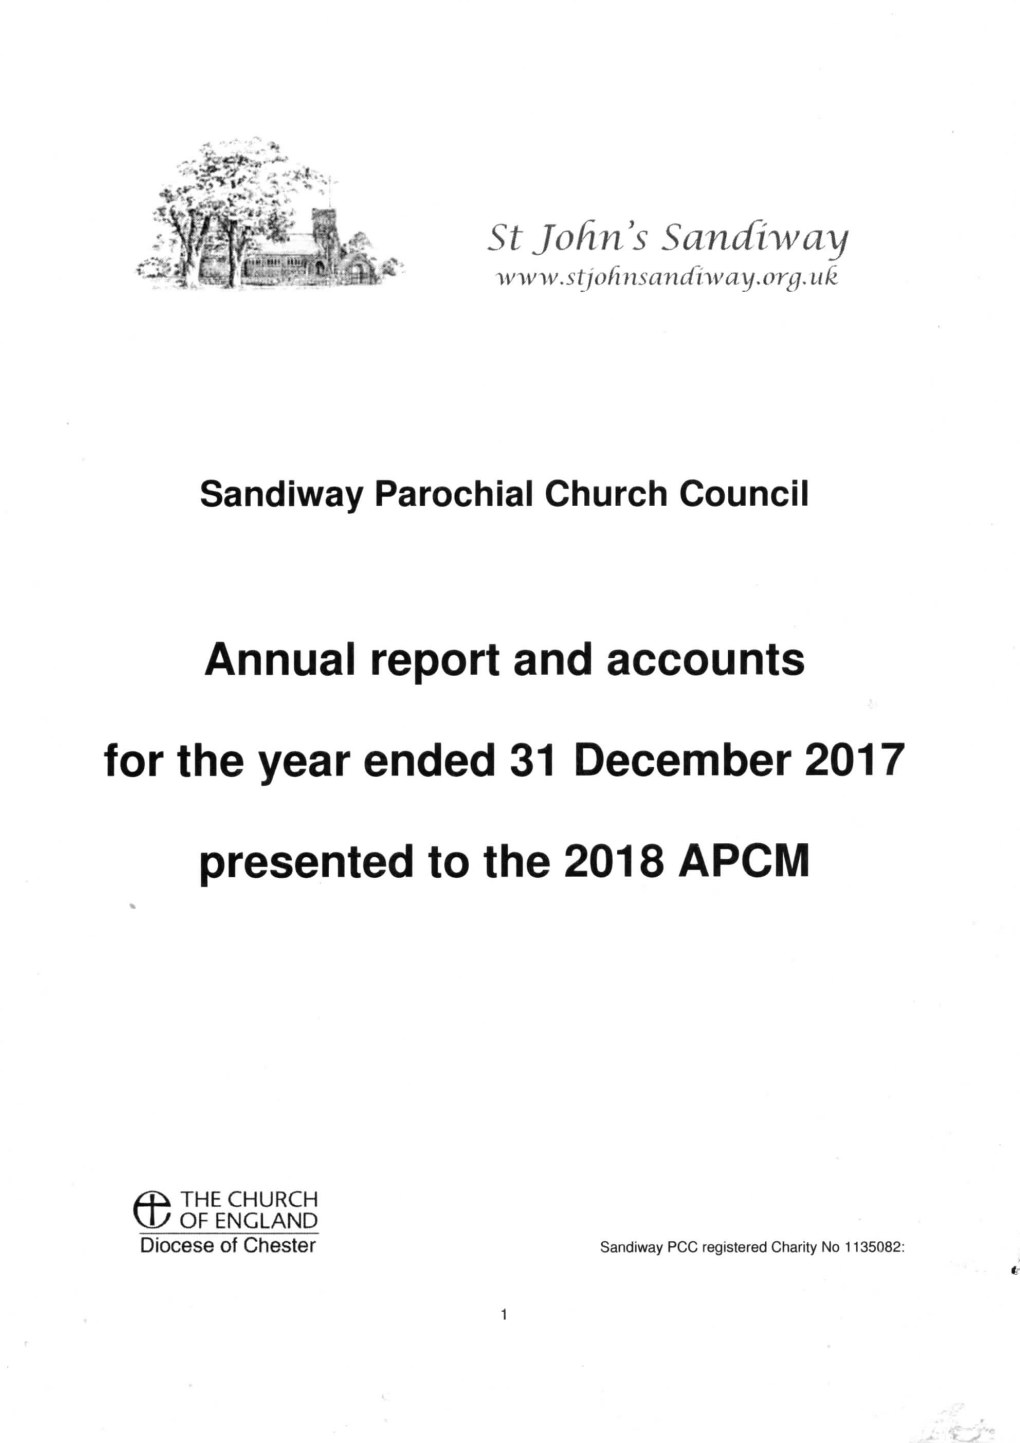 Annual Report and Accounts for the Year Ended 31 December 2017